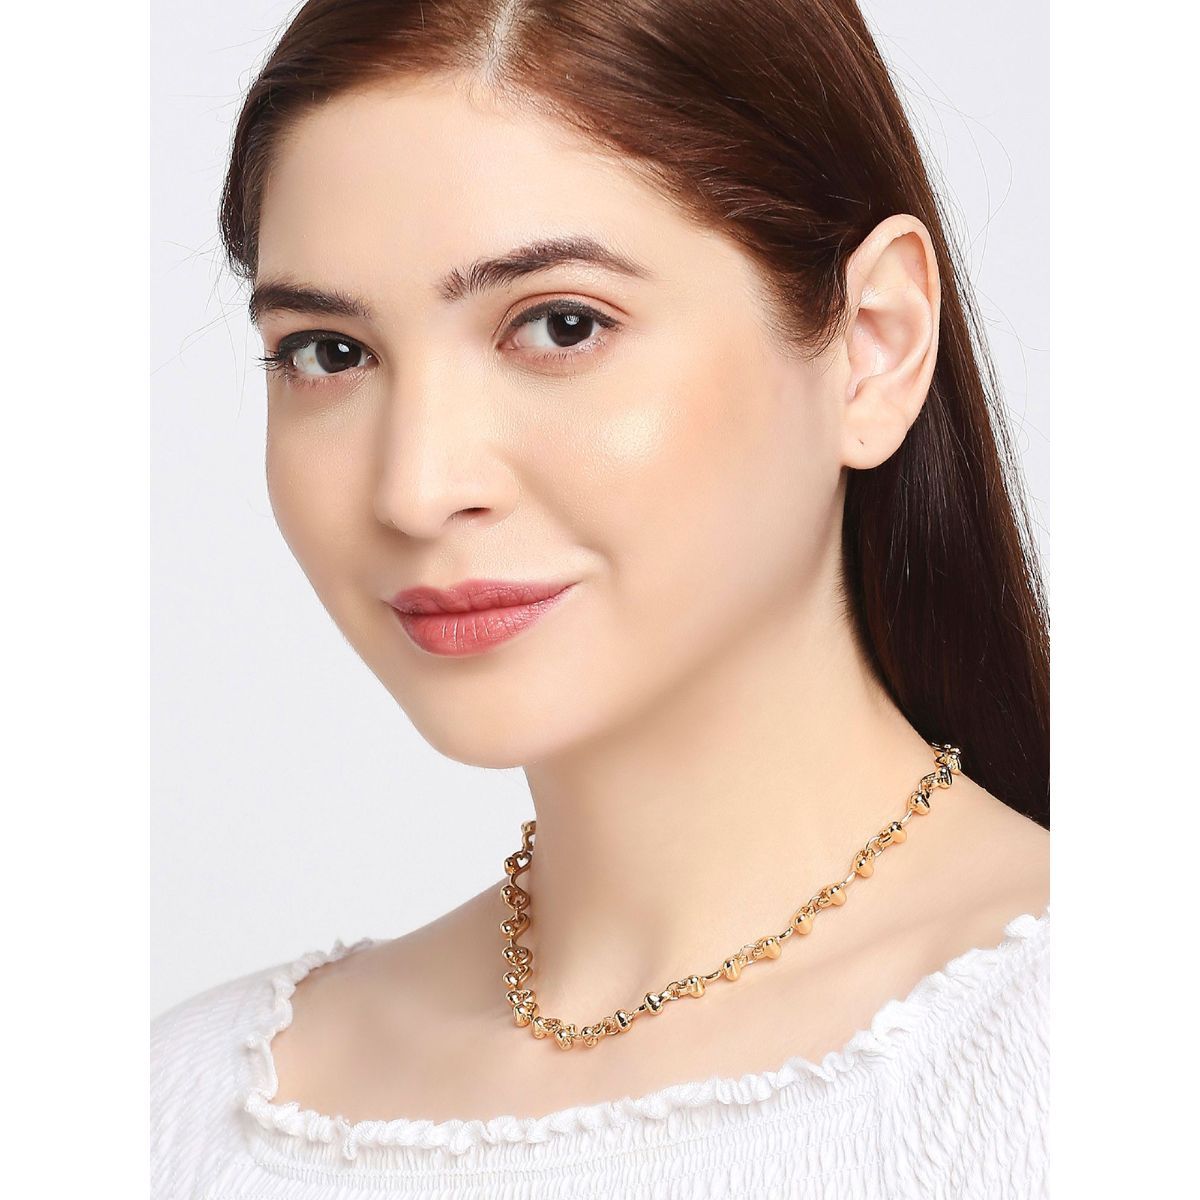 OOMPH Gold Tone Thick Interwoven Link Chain Choker Necklace